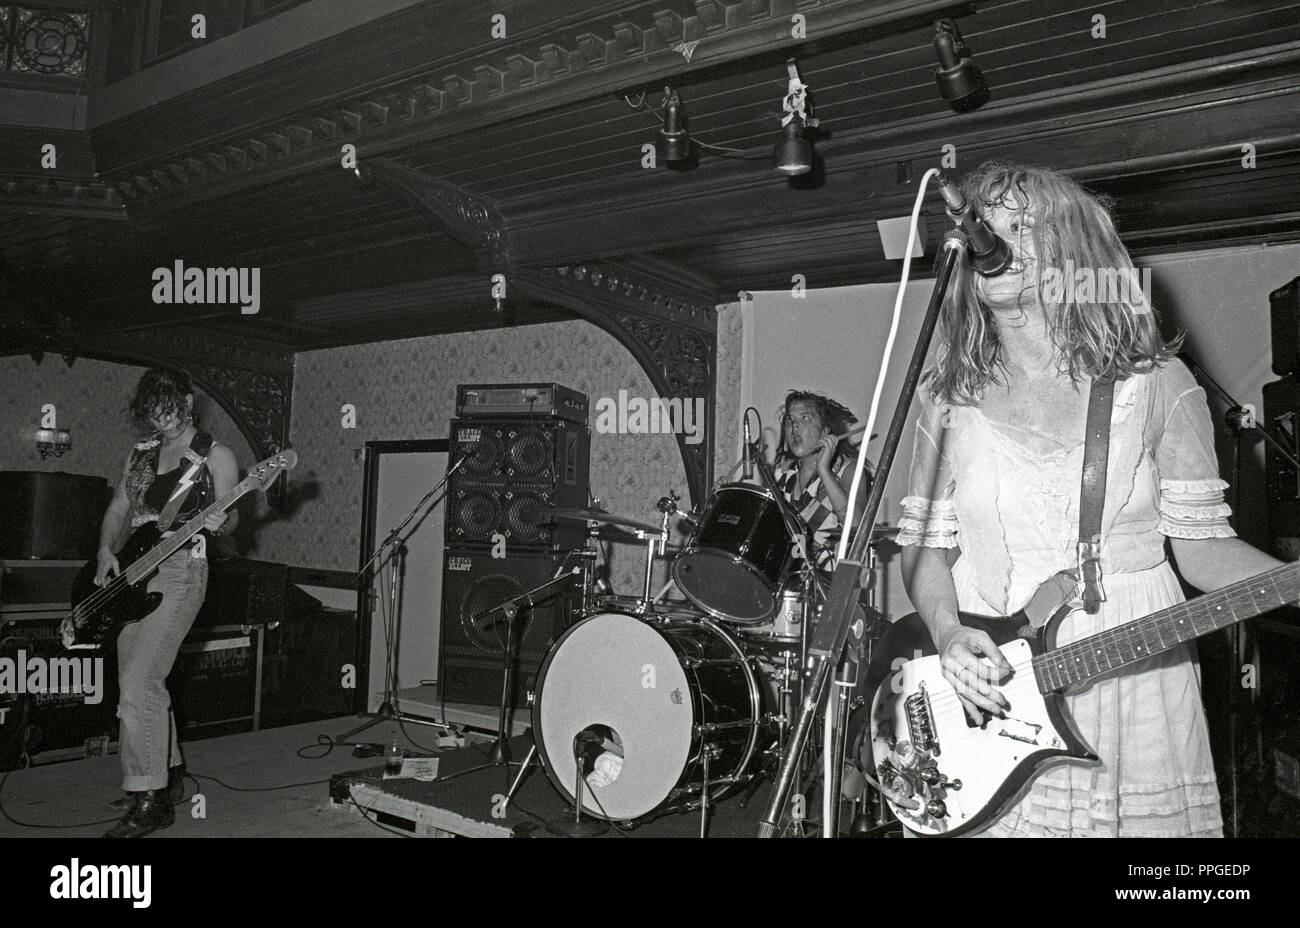 Babes In Toyland bei Bedford Esquires, 05.10.1990. Stockfoto